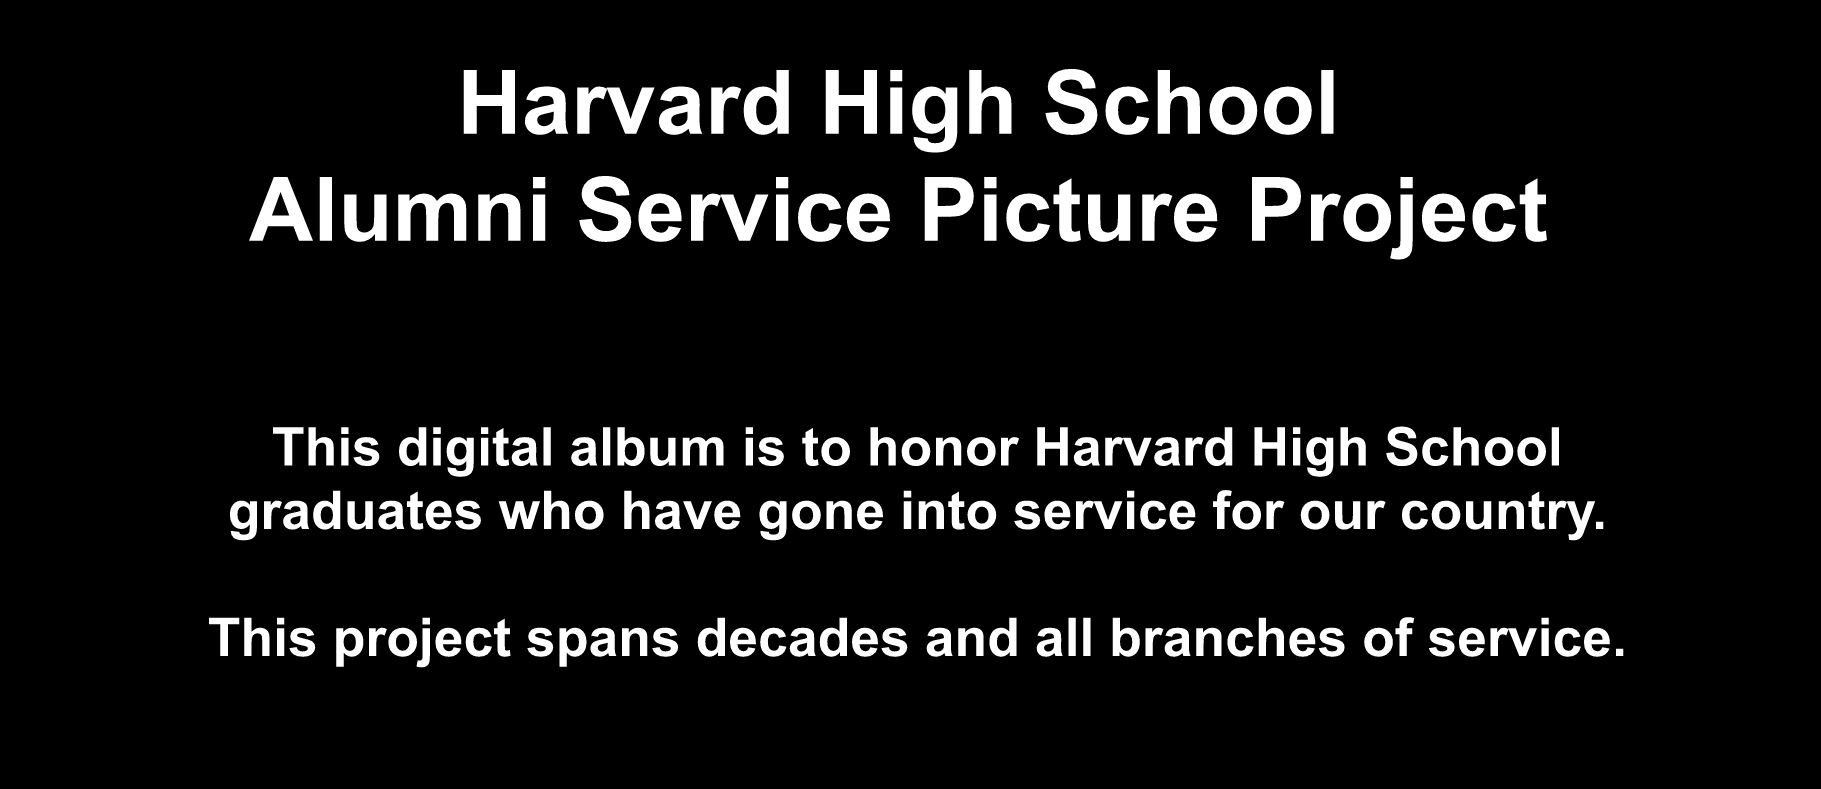 HHS Alumni Service Picture Project